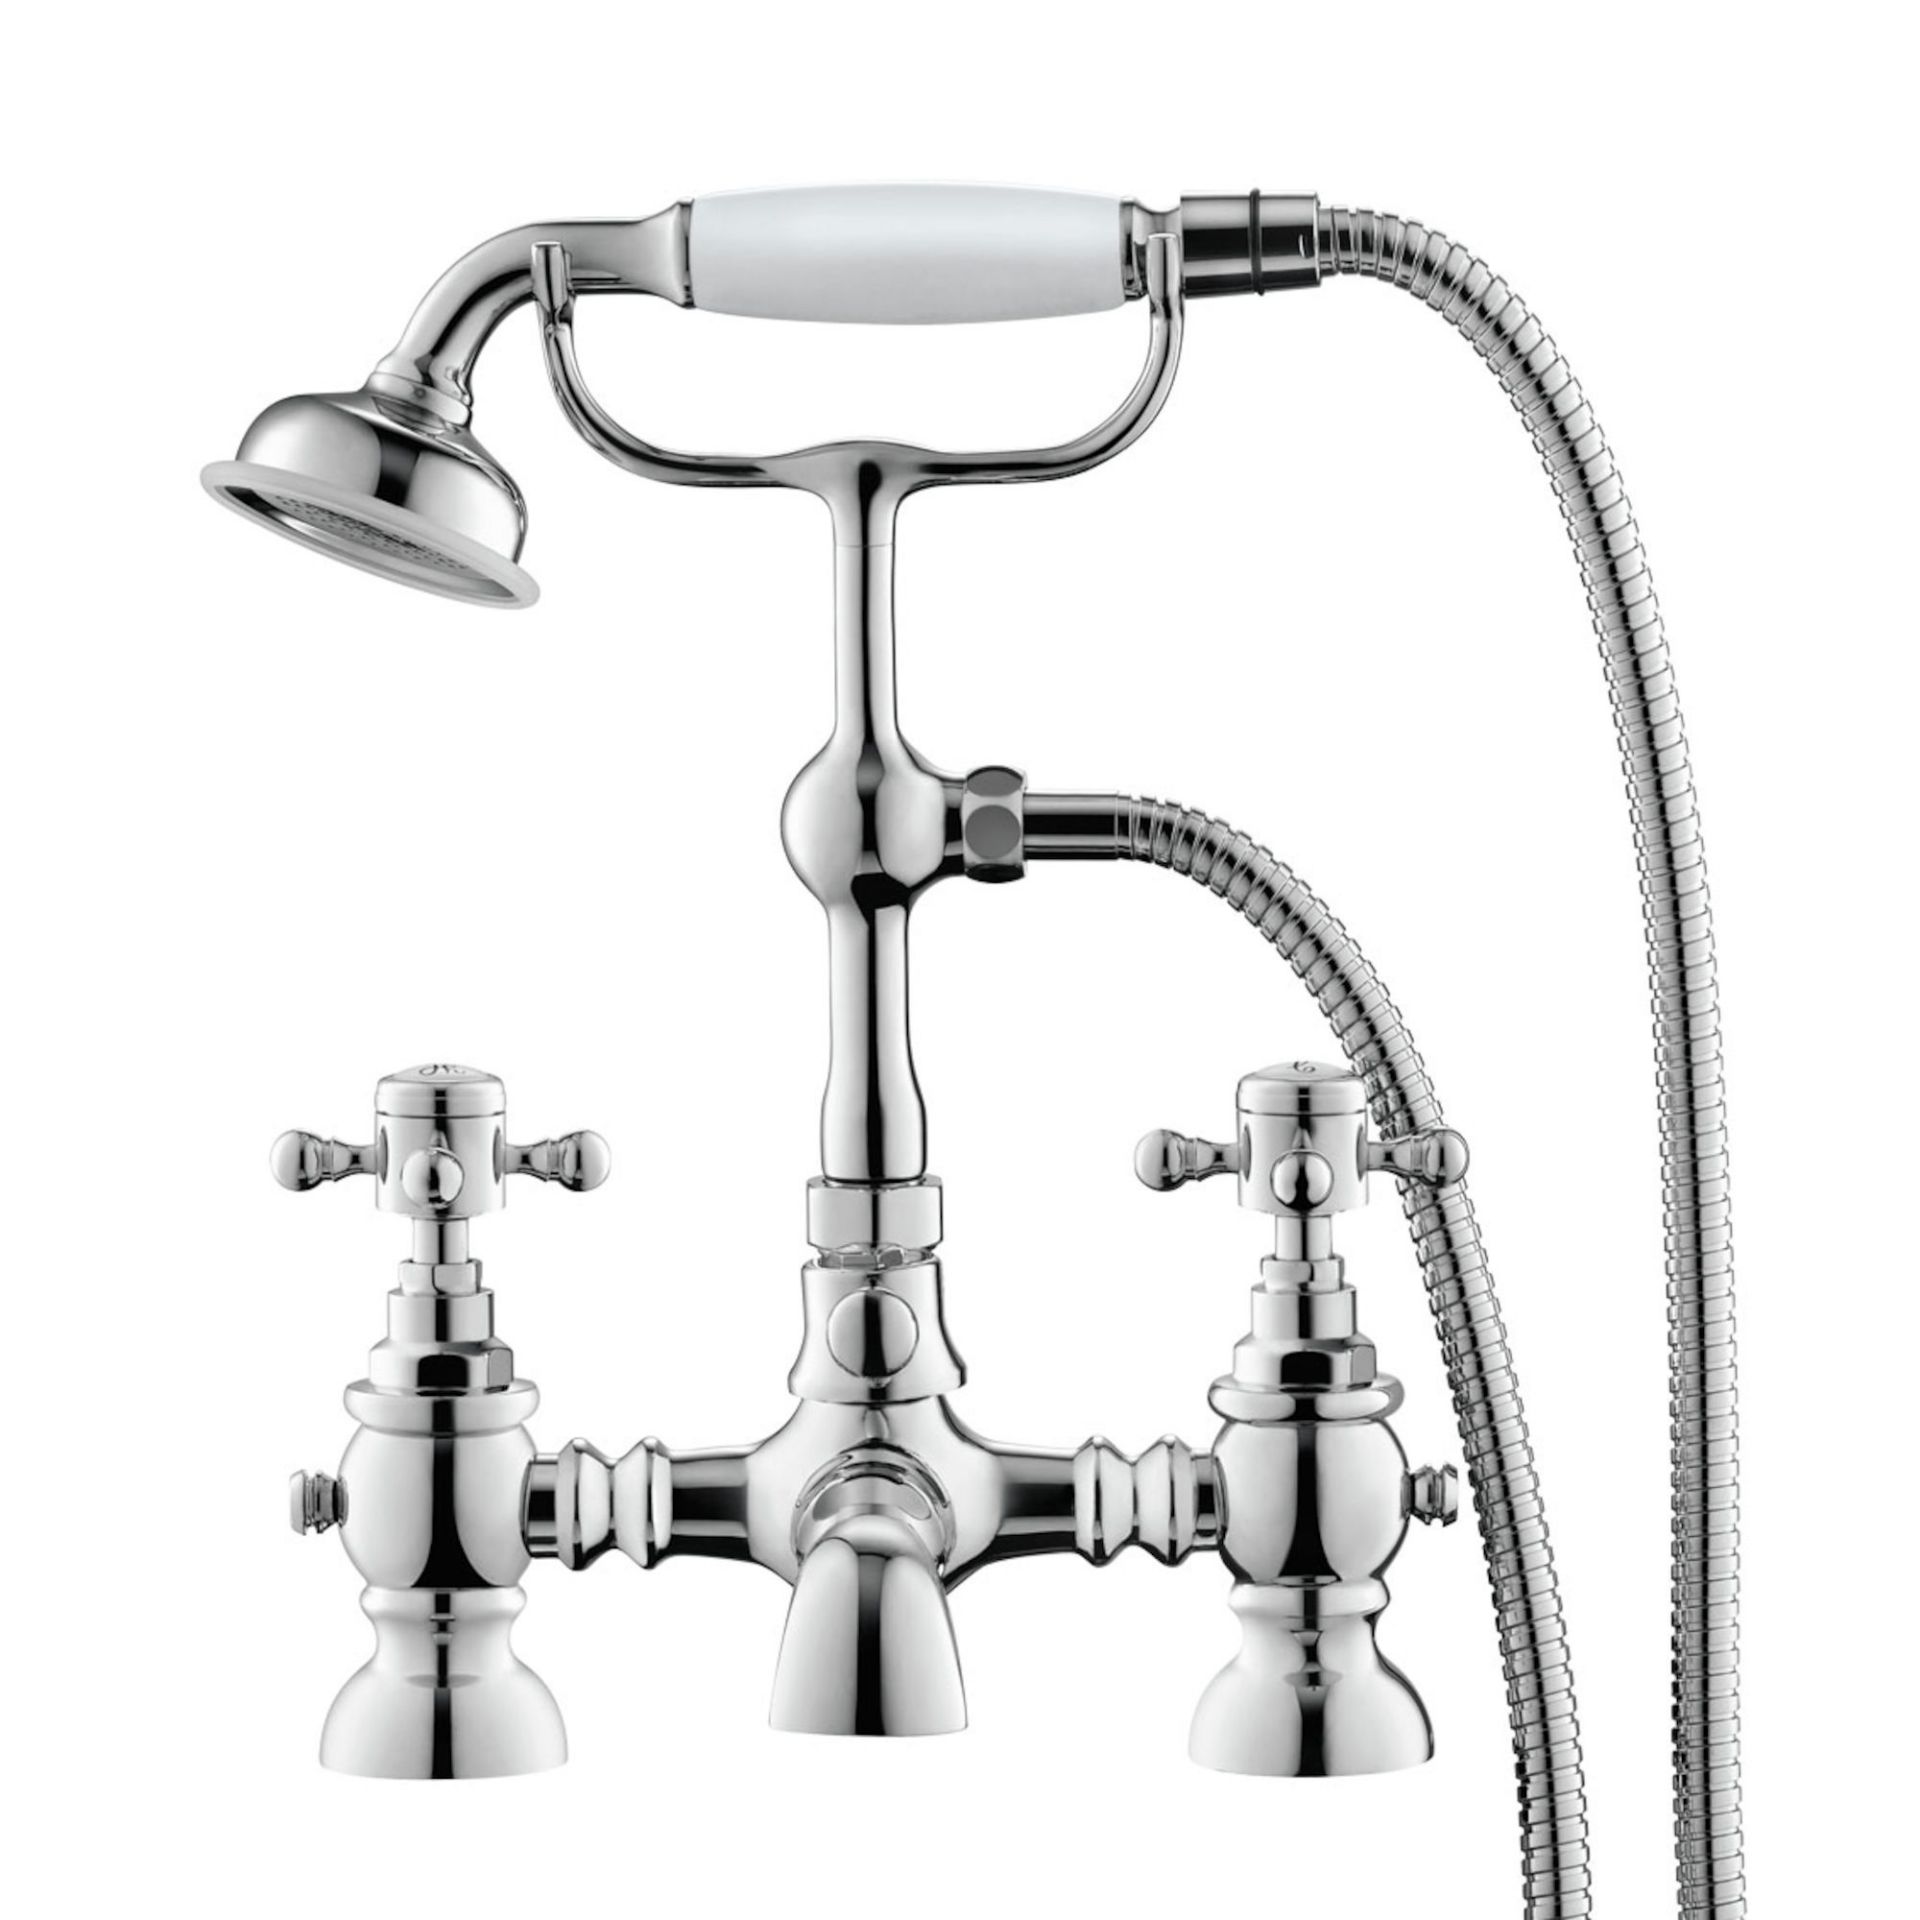 (XM64) Cambridge Bath Shower Mixer - Traditional Tap with Handheld Shower We love this because it - Image 2 of 4